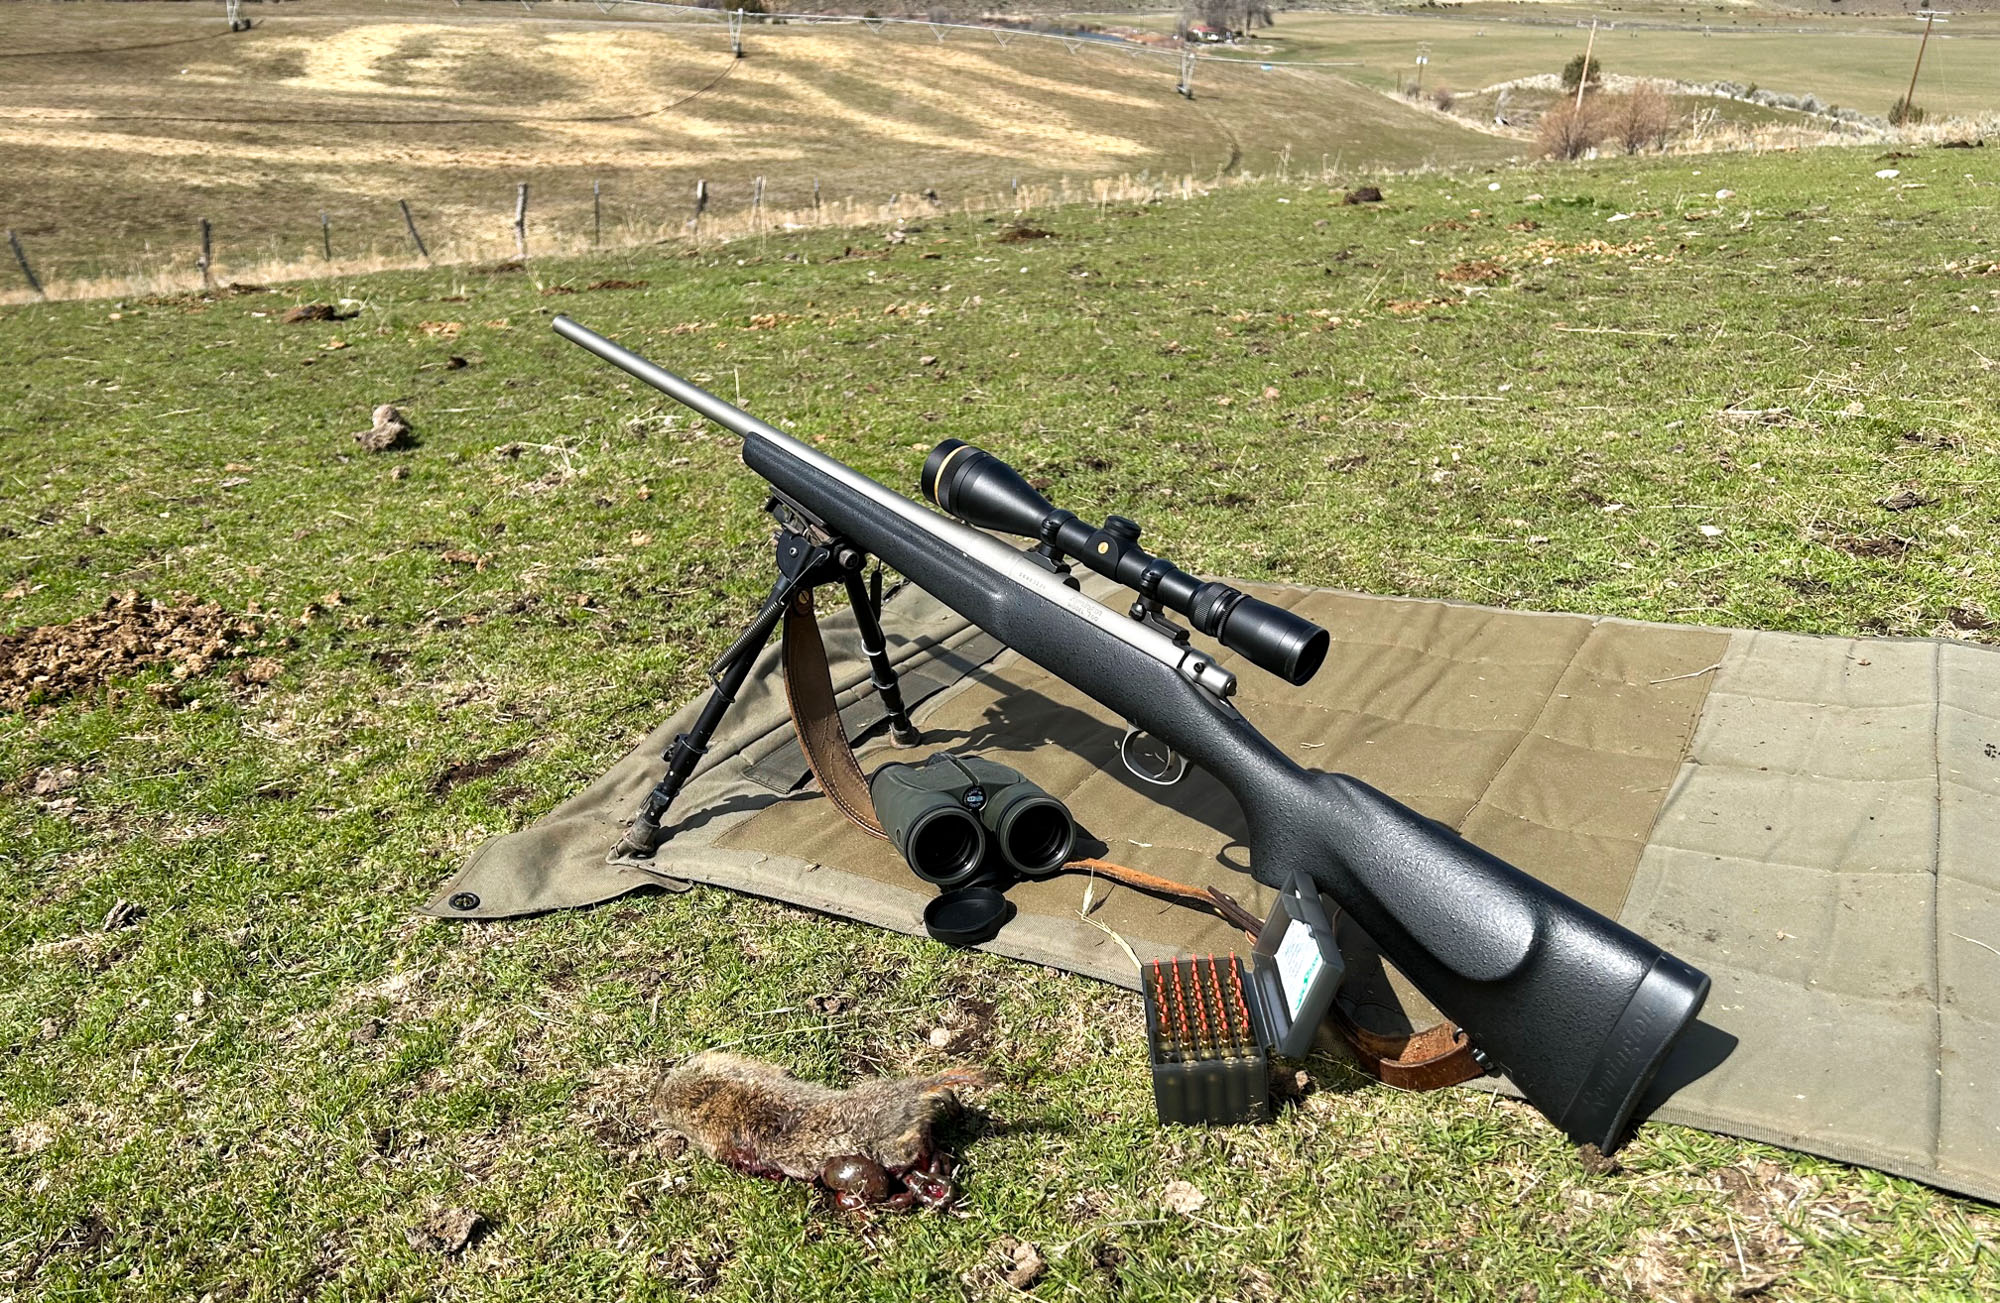 The .17 Fireball is at home on a hill perched above a field full of gophers. 